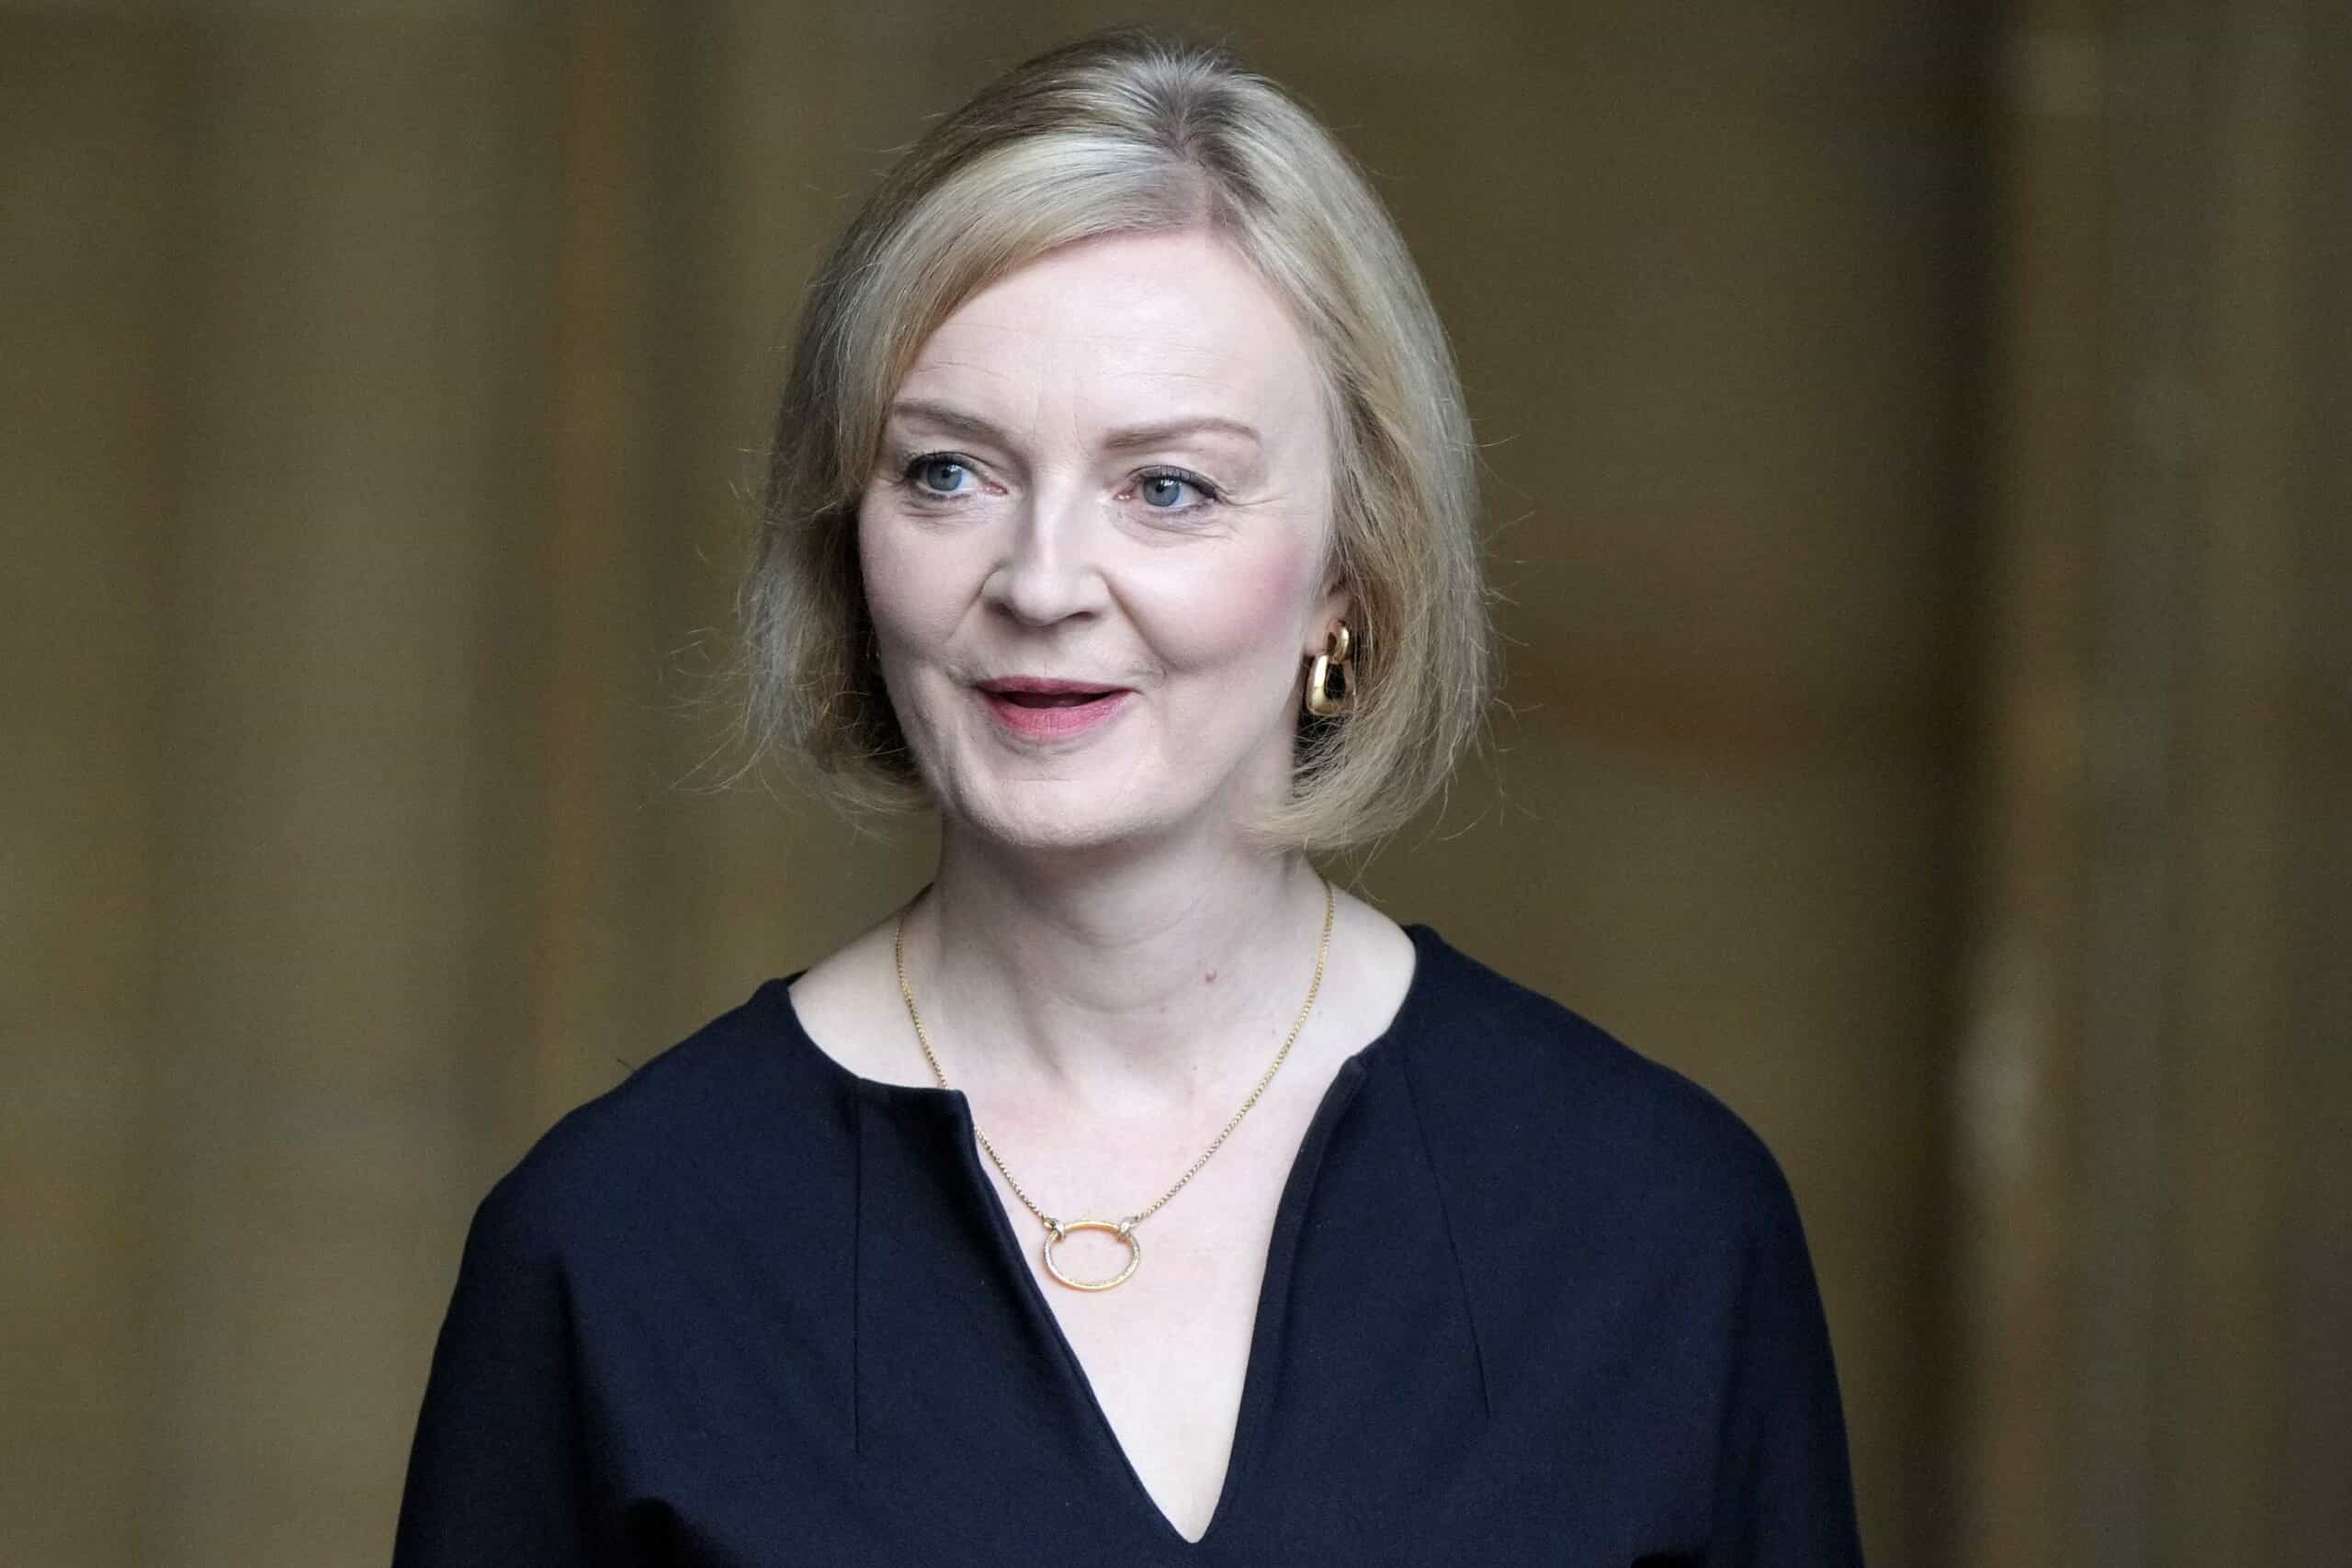 Liz Truss’s dad said to be ‘appalled’ by his daughter’s policies